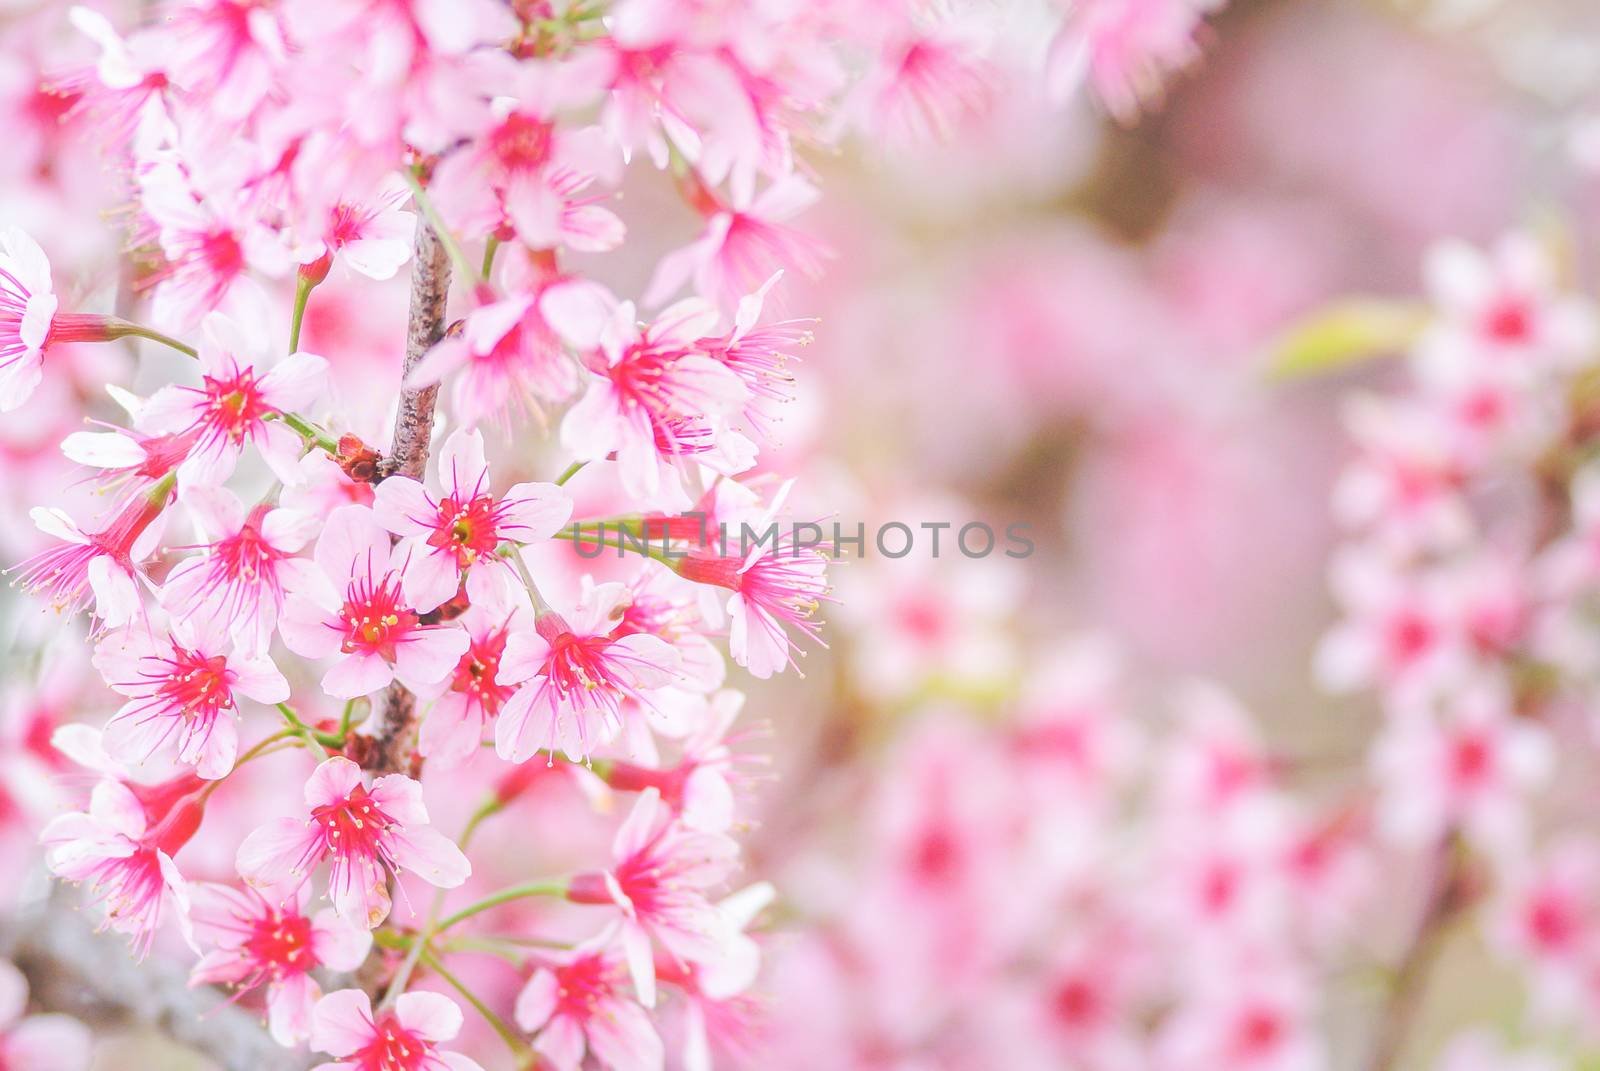 Cherry Blossom in spring with soft focus, unfocused blurred spri by yuiyuize